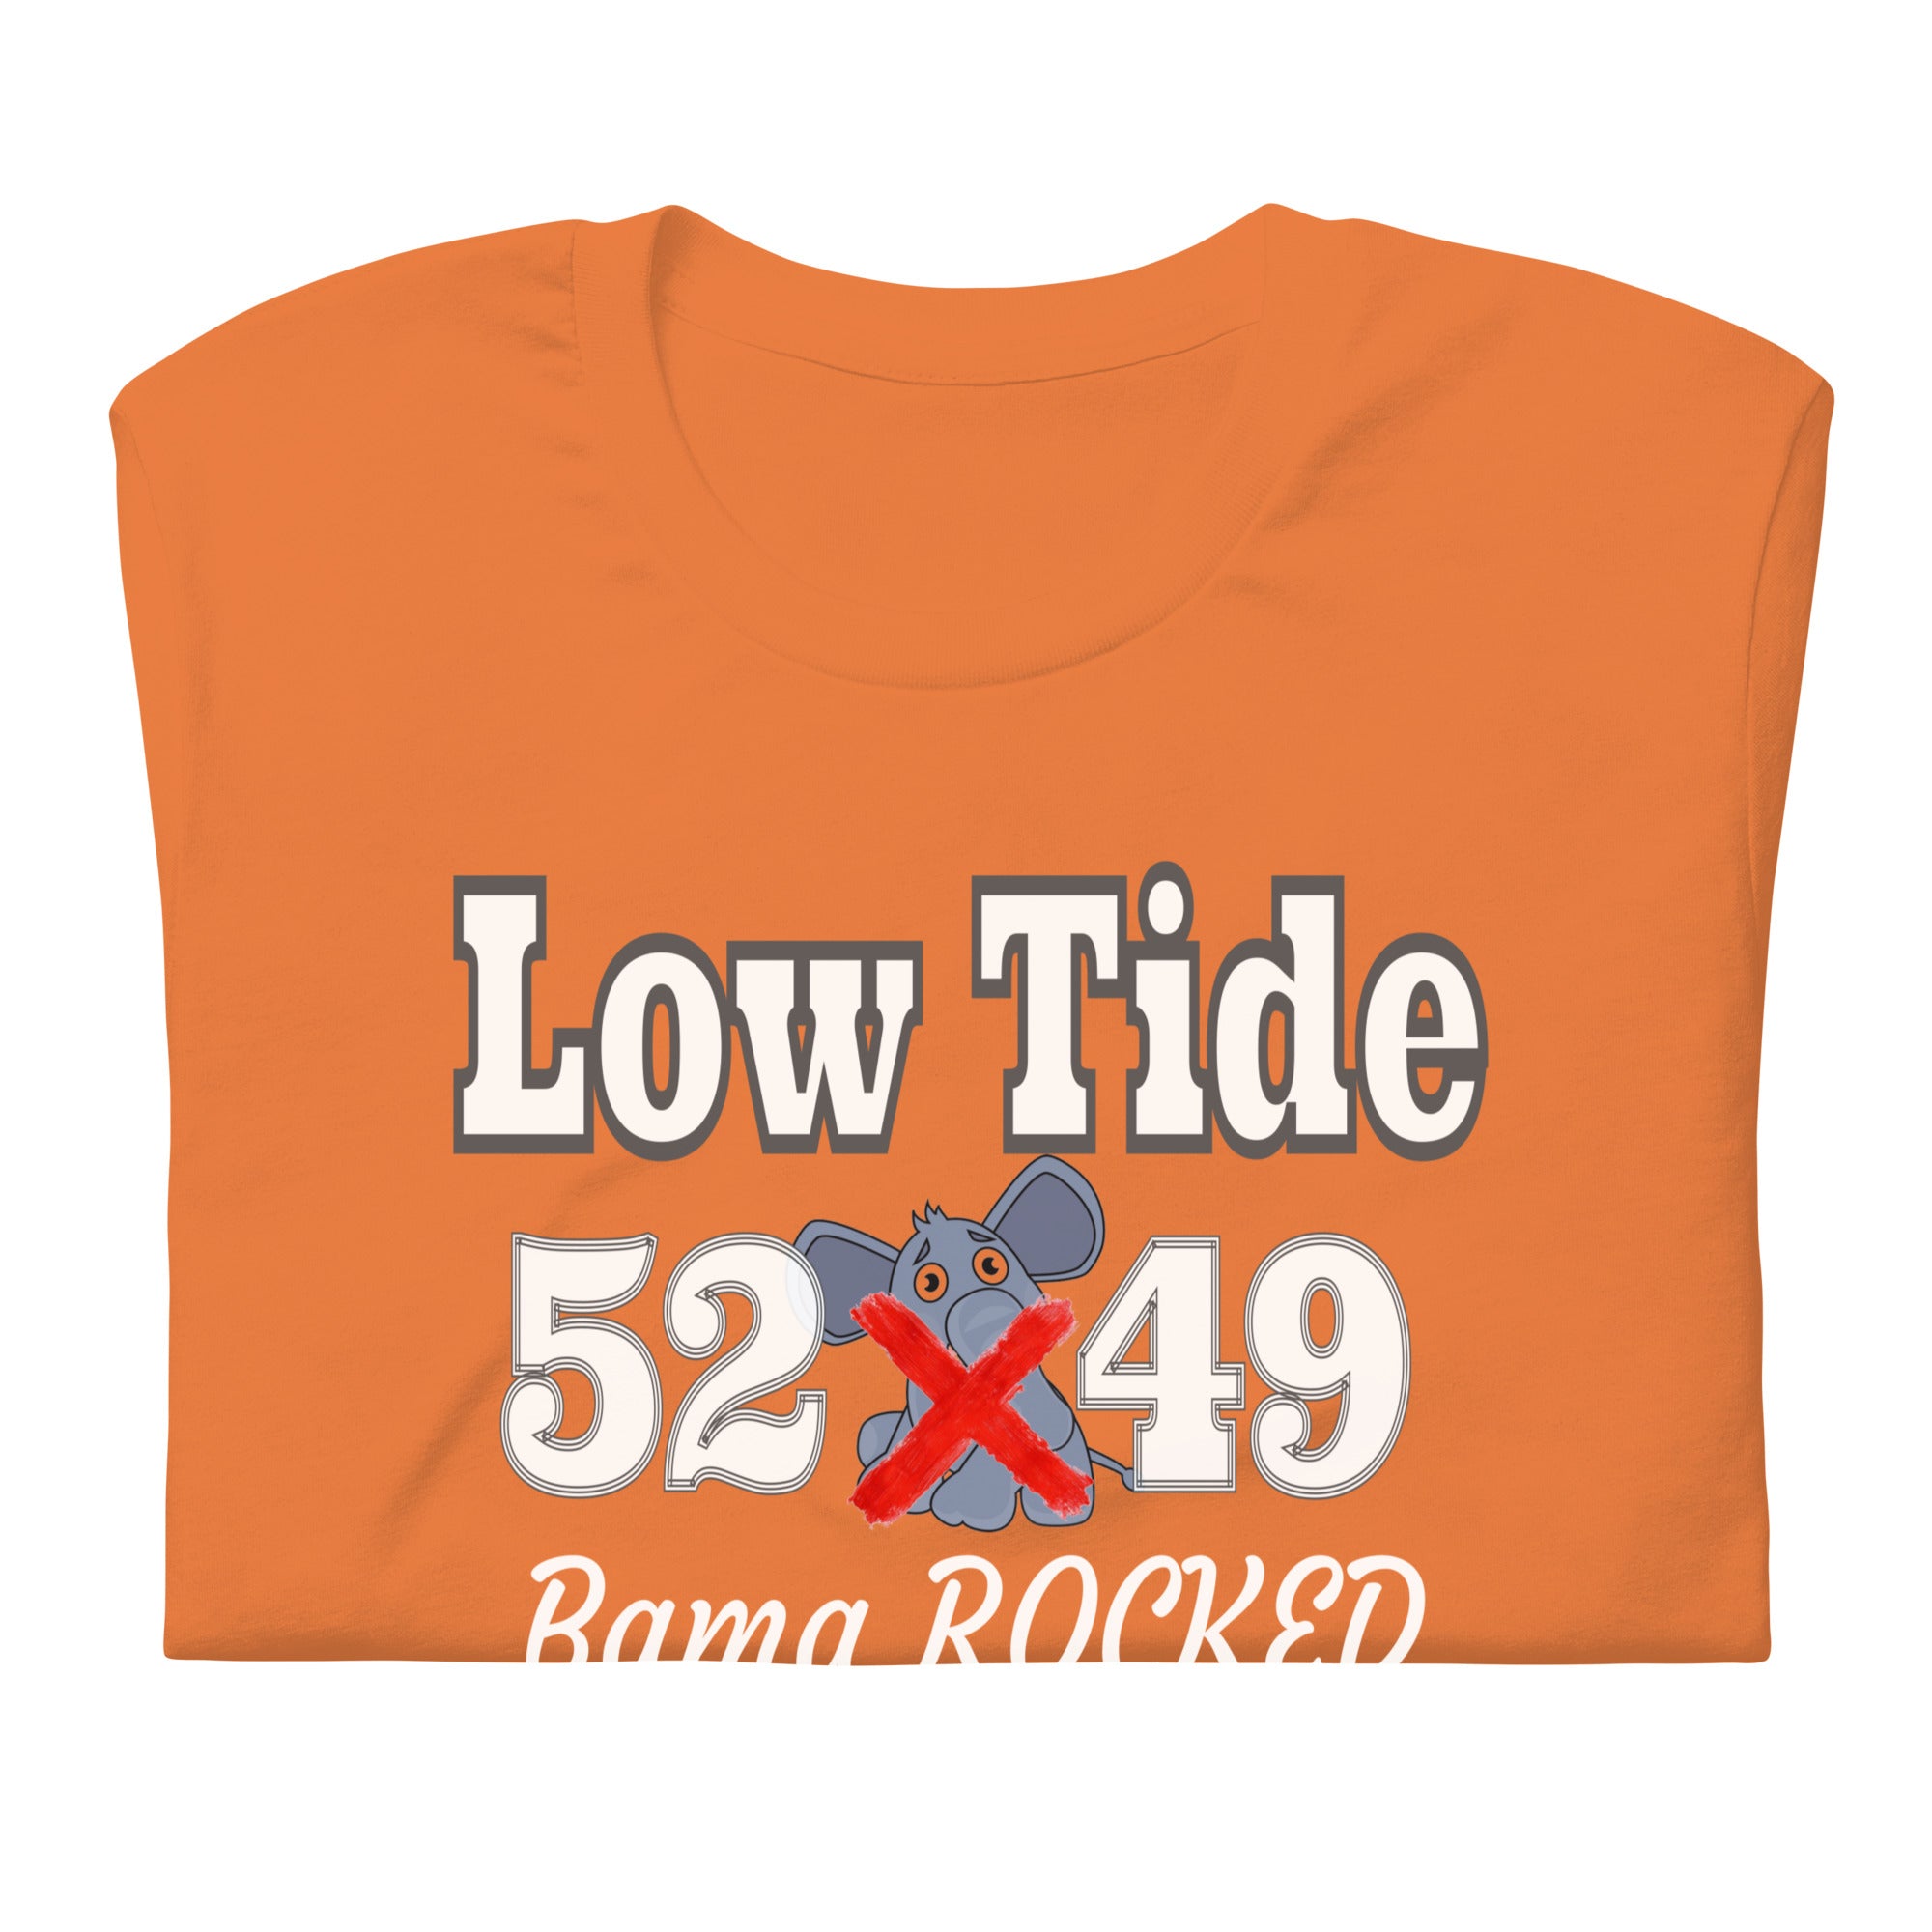 Tennessee over Alabama Score Shirt Featuring 52-49 Score